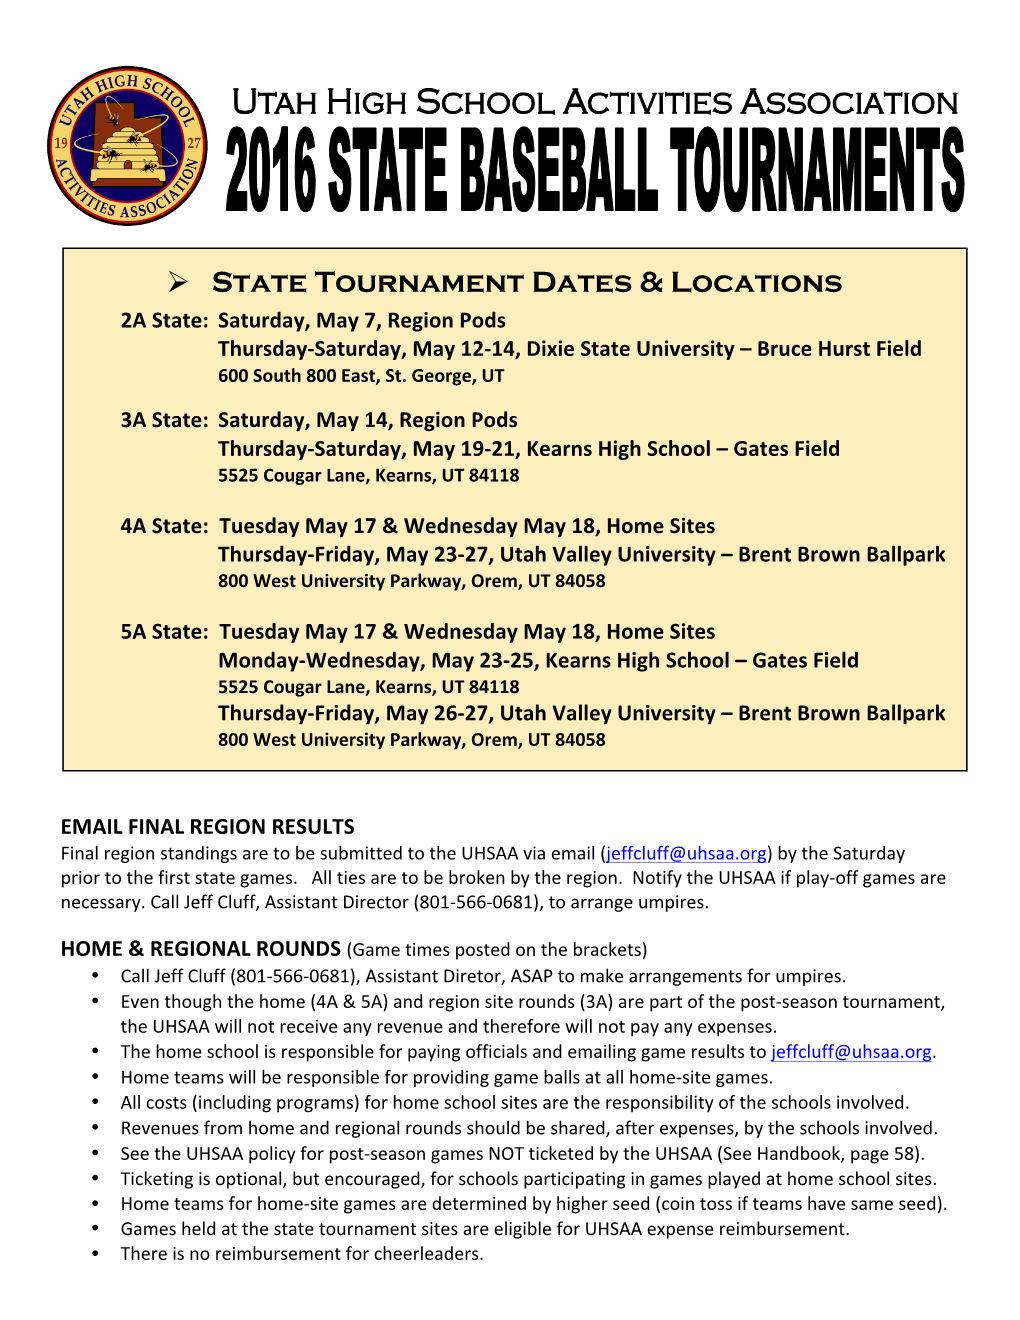 State Tournament Dates & Locations